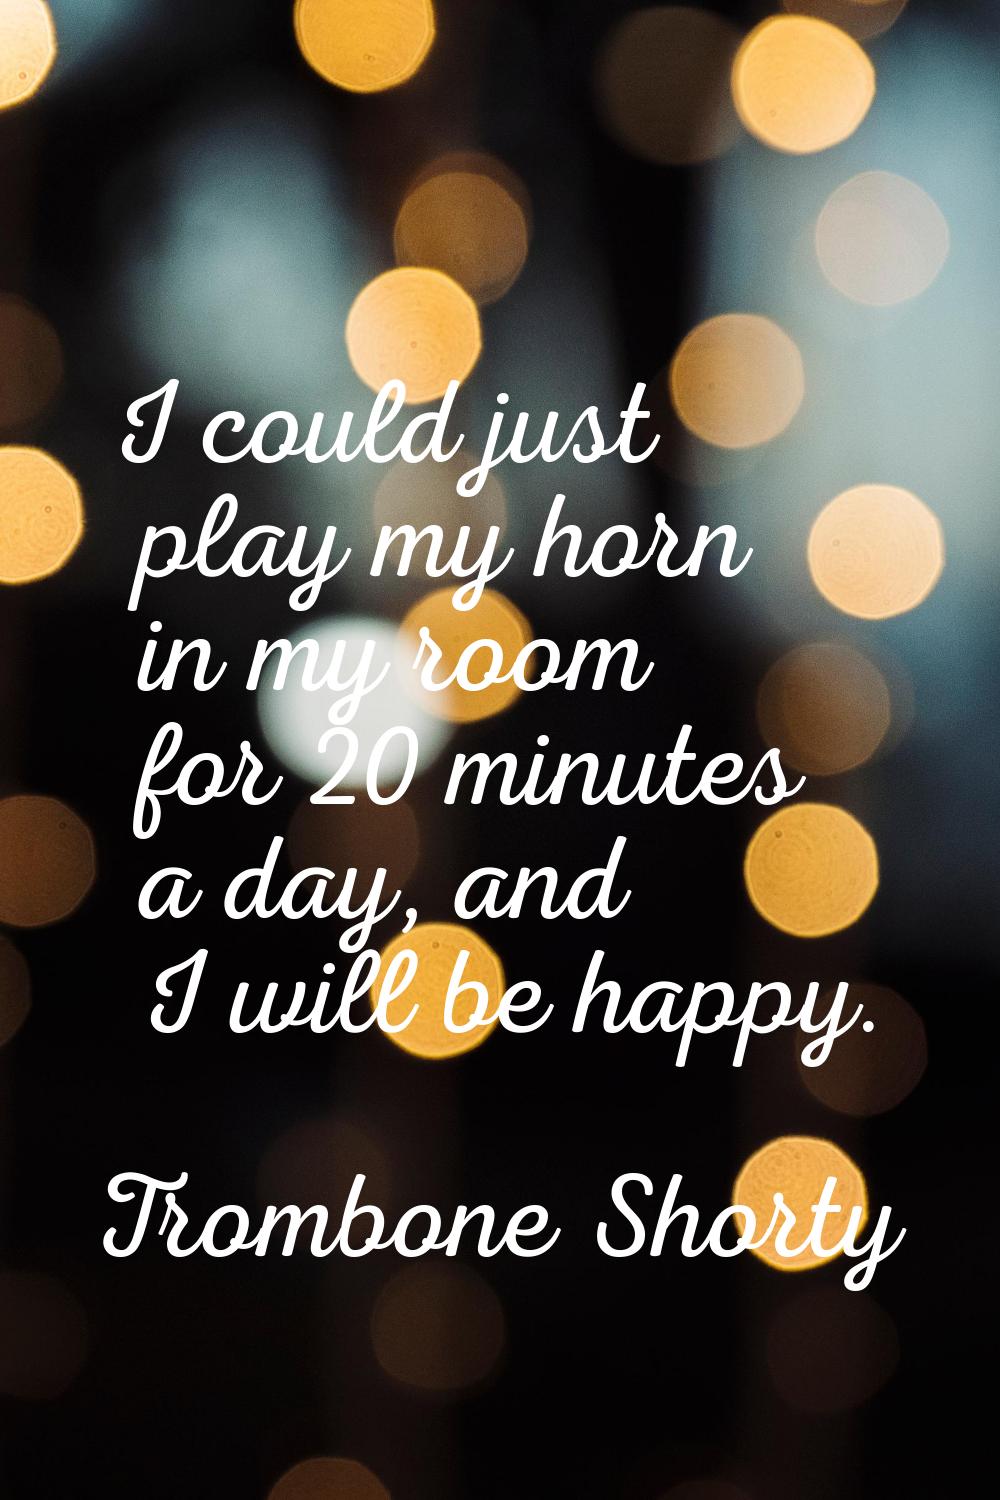 I could just play my horn in my room for 20 minutes a day, and I will be happy.